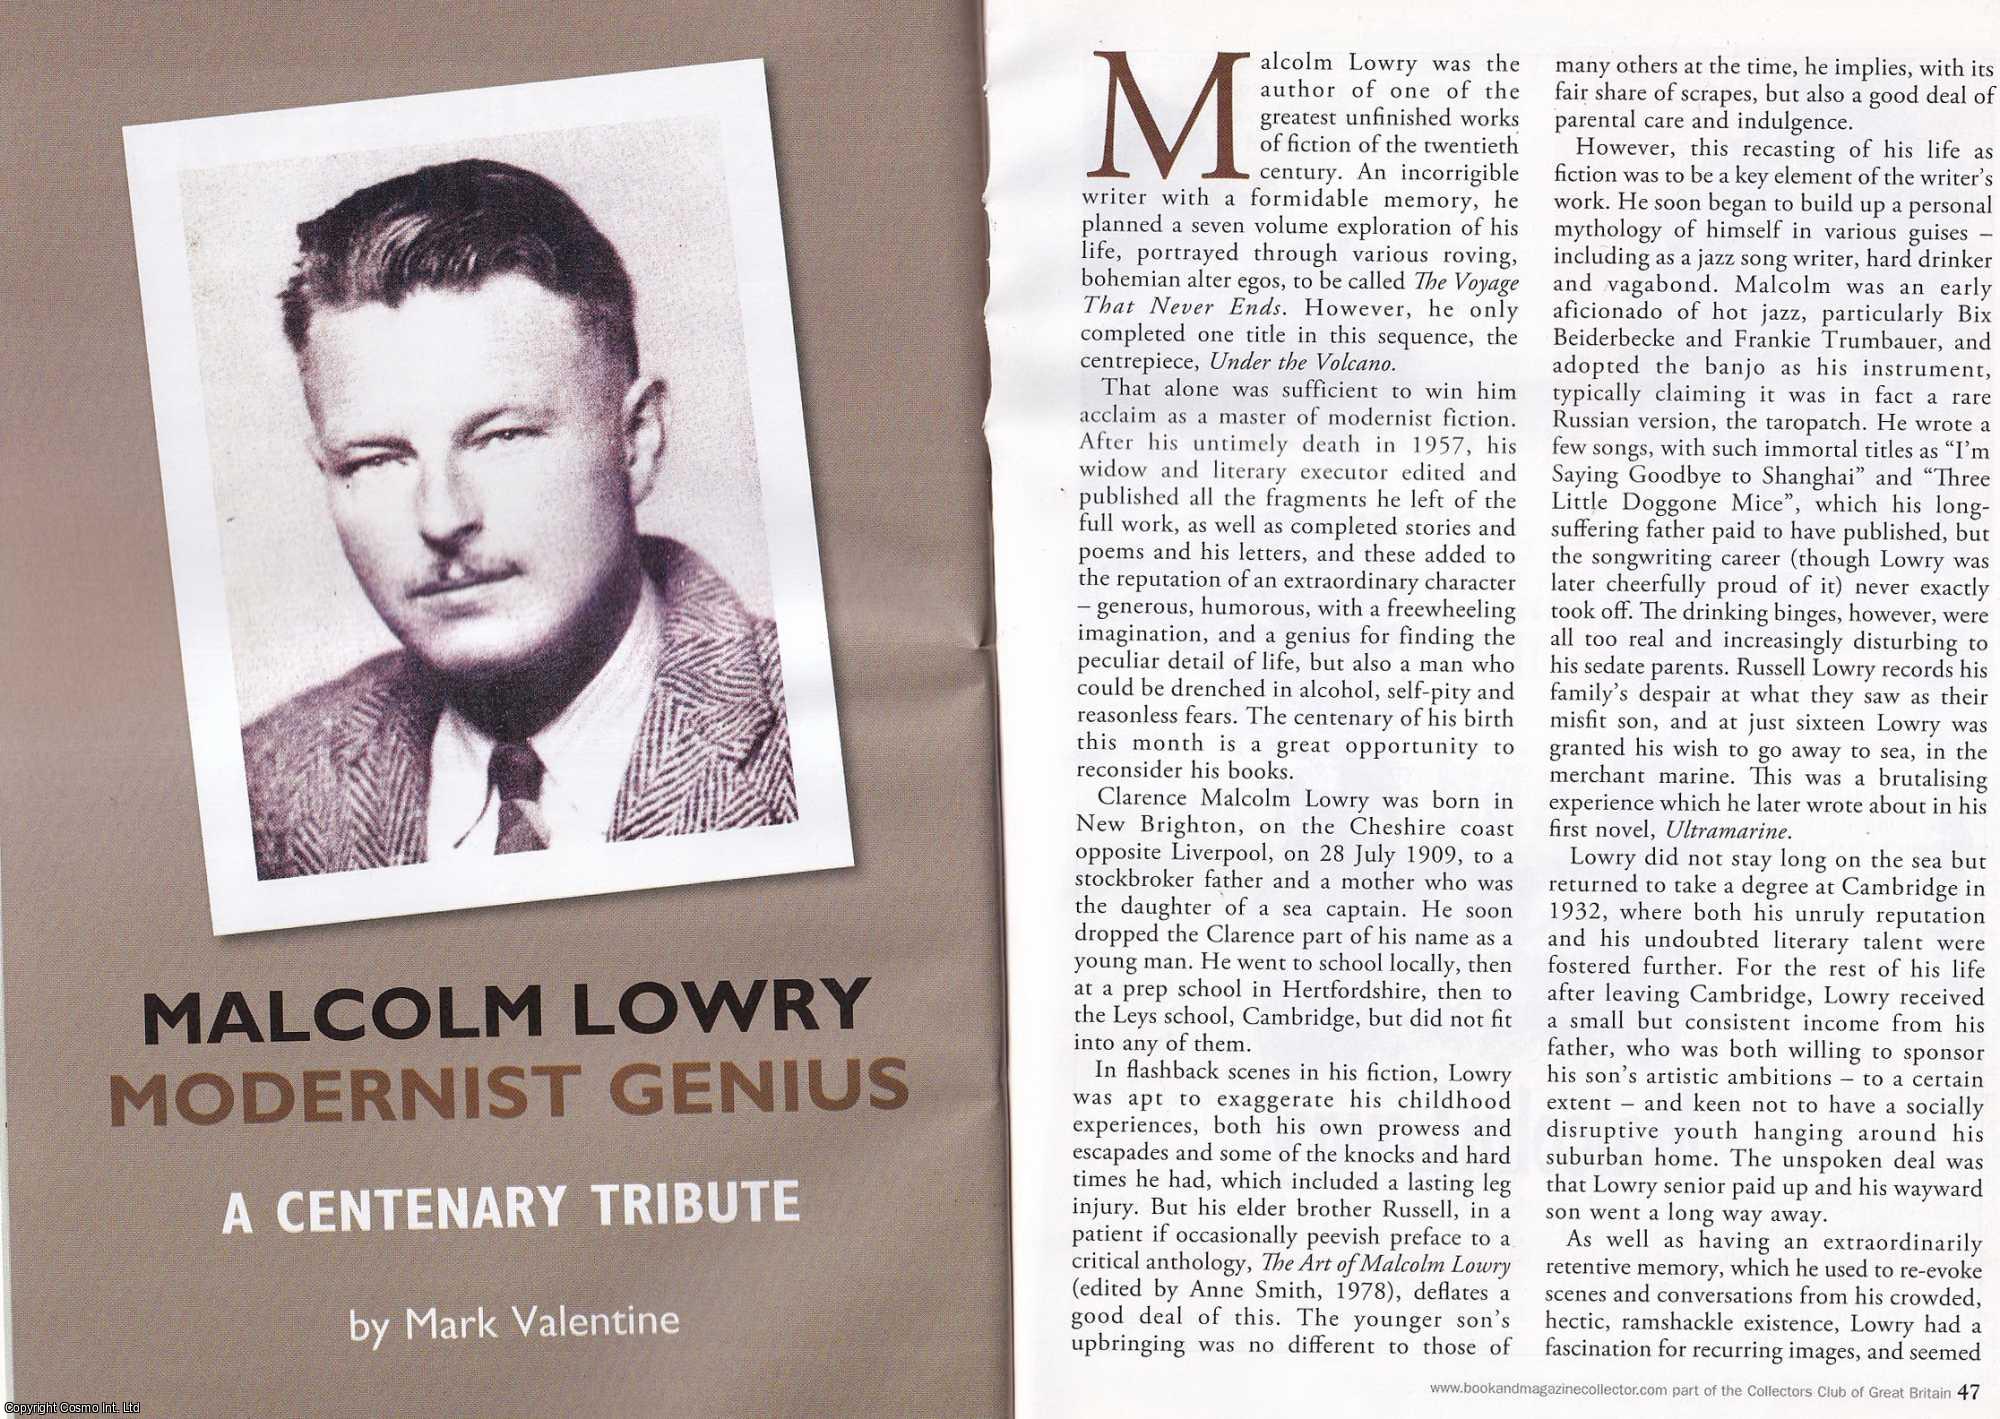 Mark Valentine - Malcolm Lowry, Modernist Genius : A Centenary Tribute. This is an original article separated from an issue of The Book & Magazine Collector publication.